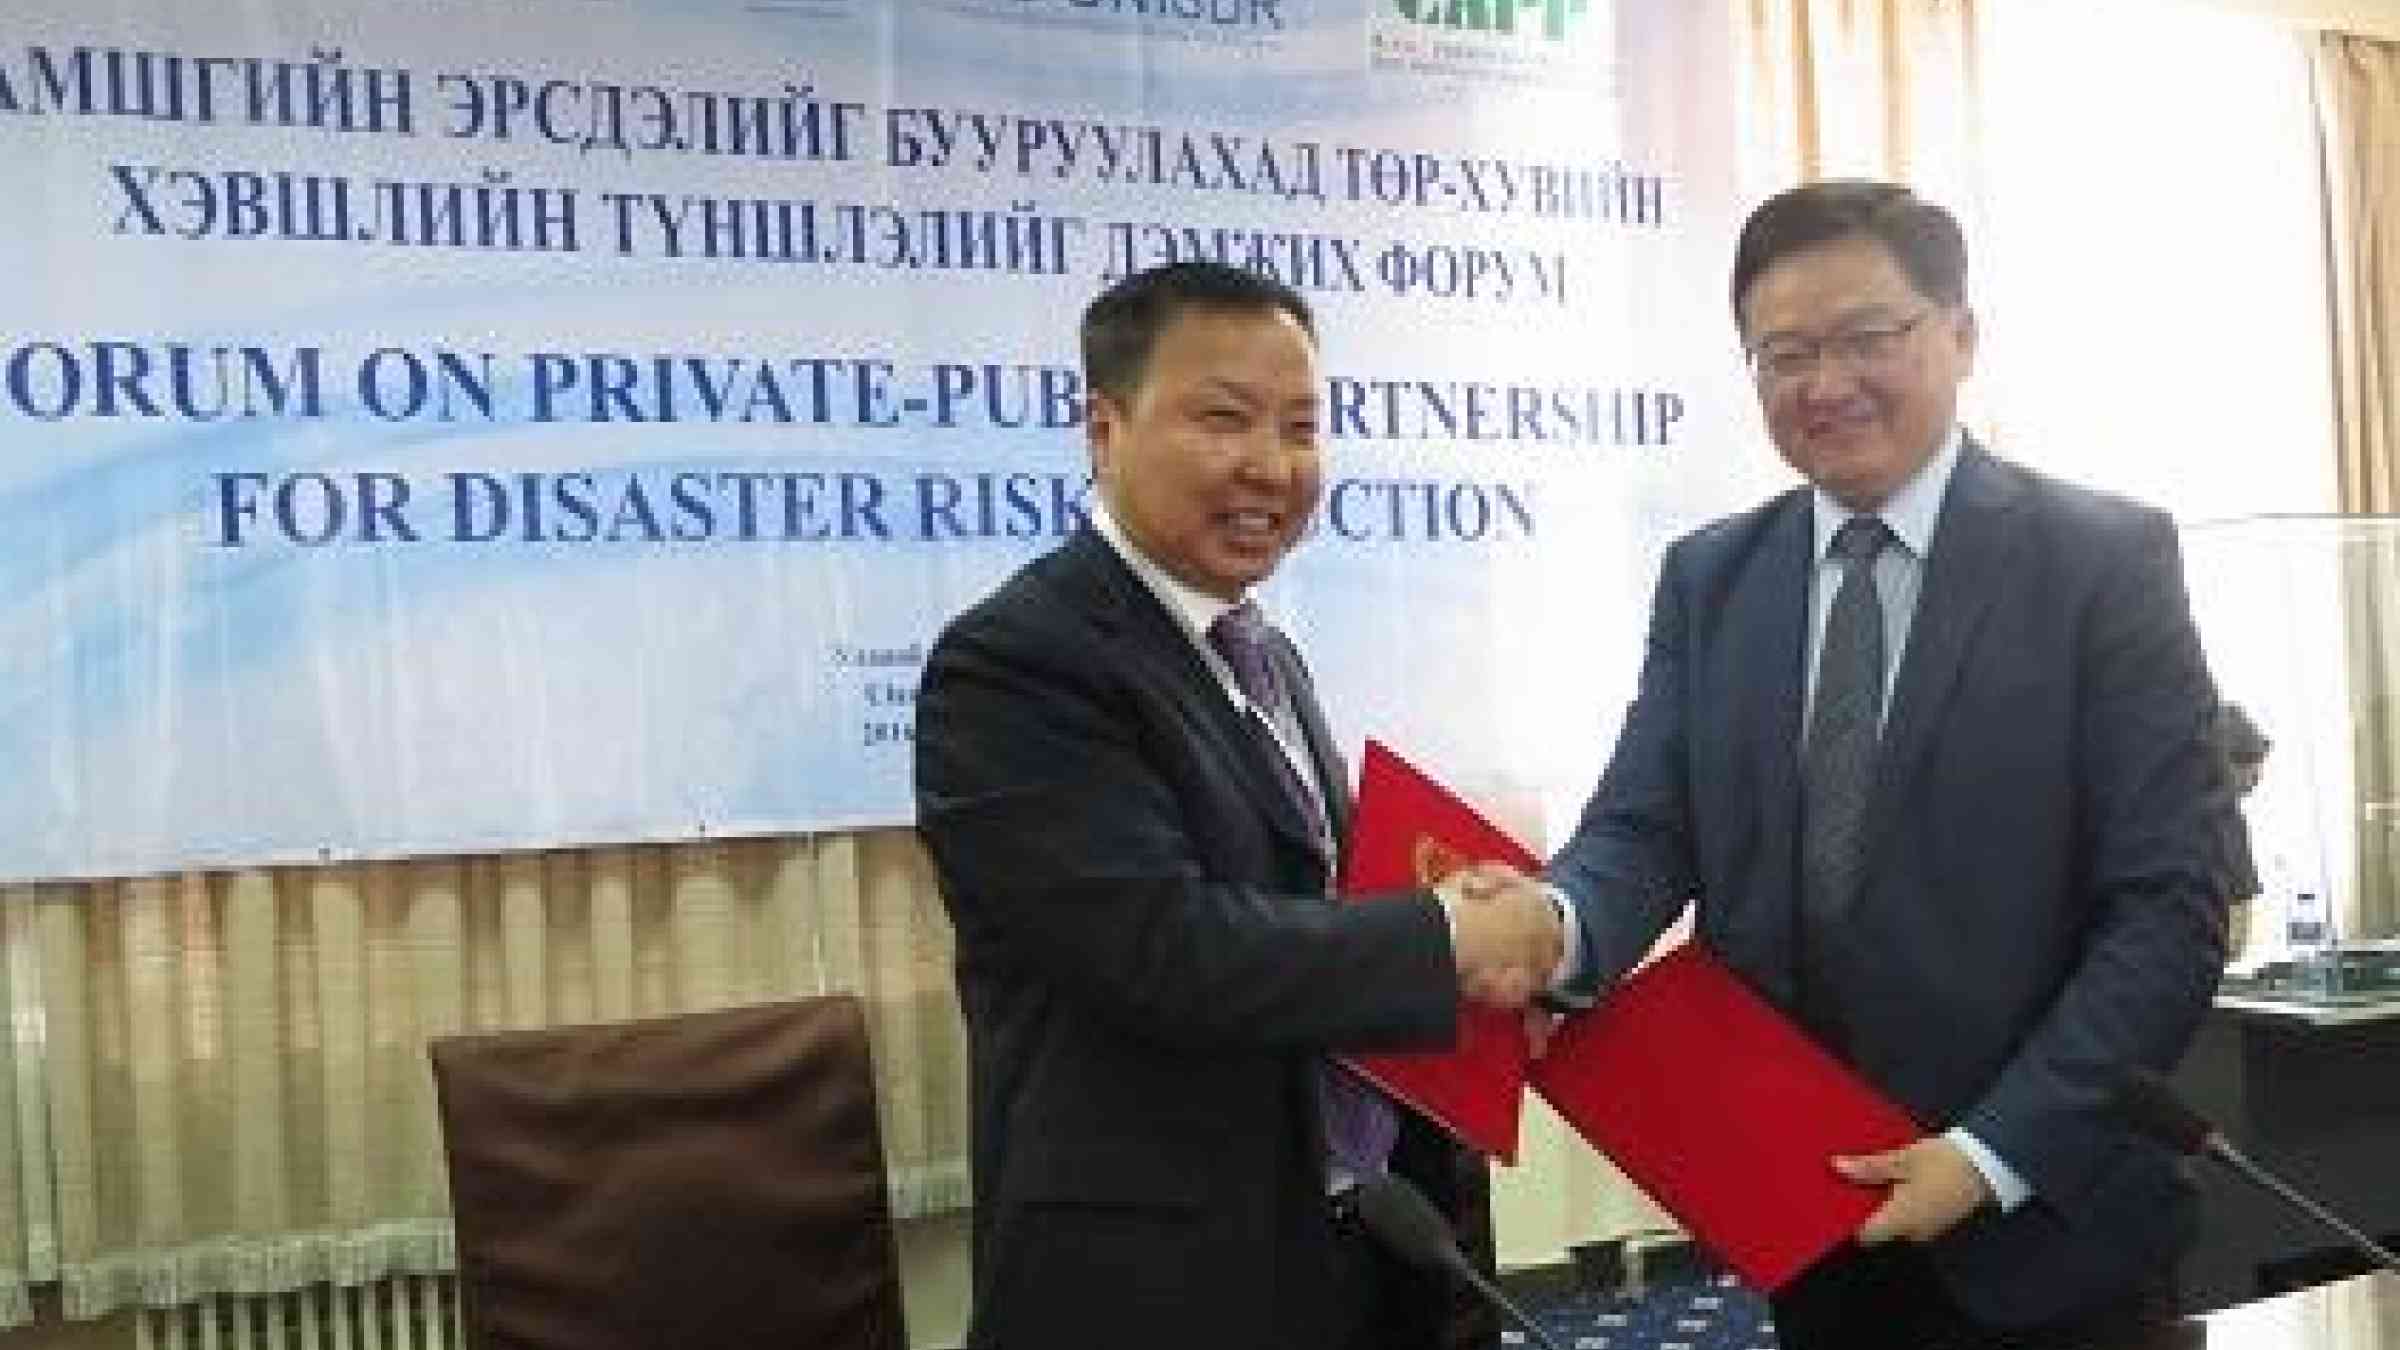 The Deputy Chief of the National Emergency Management Agency, Colonel Gombojav Ariunbuyan (left), and the President of the Mongolian National Chamber of Commerce and Industry, Mr Baatarjav Lkhagvajav, exchange copies of the agreement between the two sides. (Photo: UNISDR)